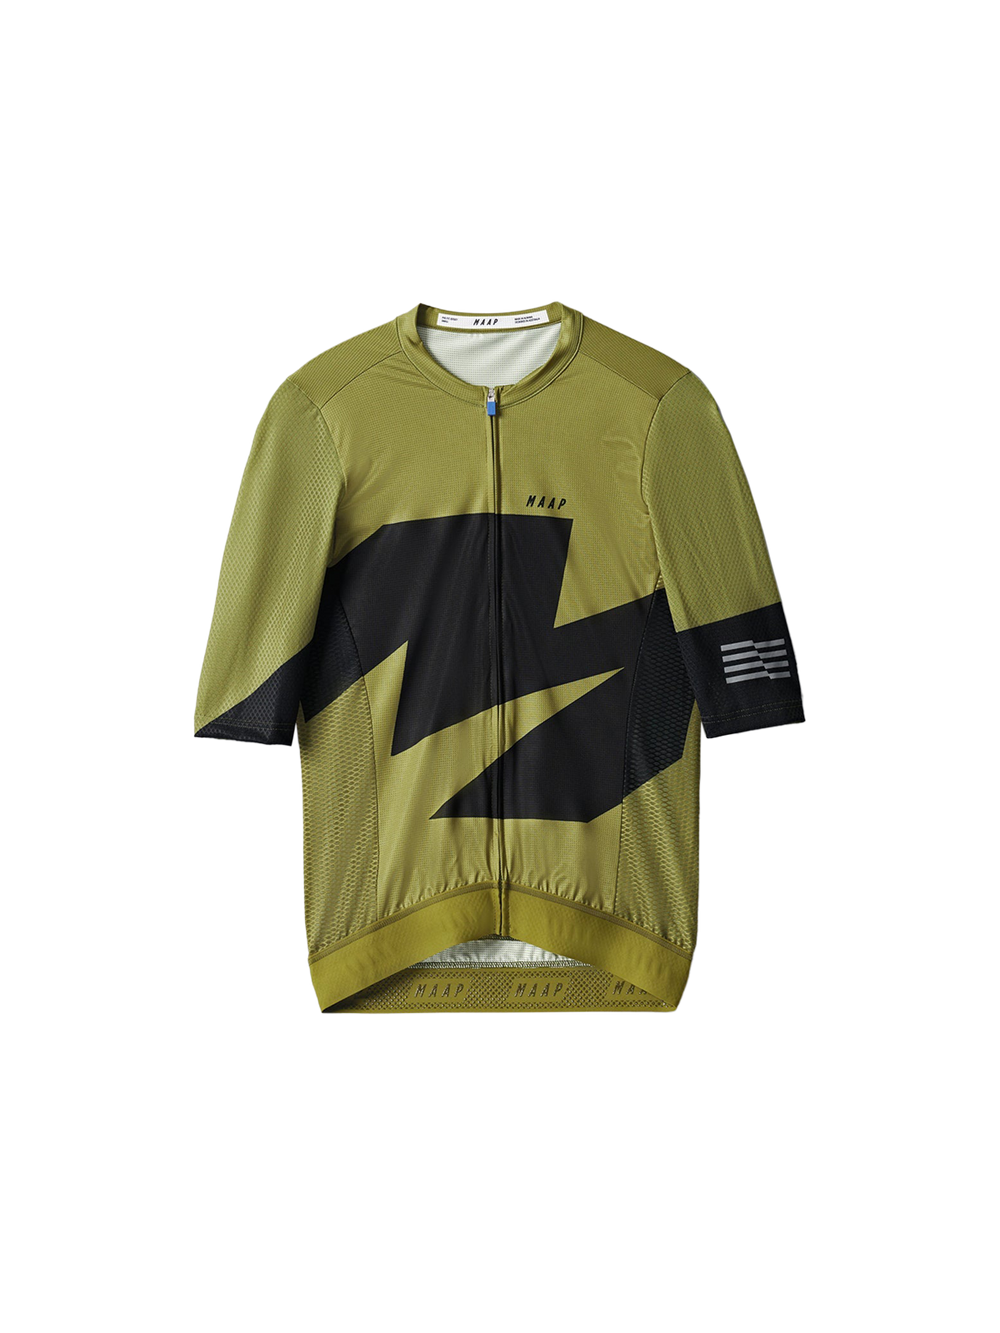 Product Image for Evolve Pro Air Jersey